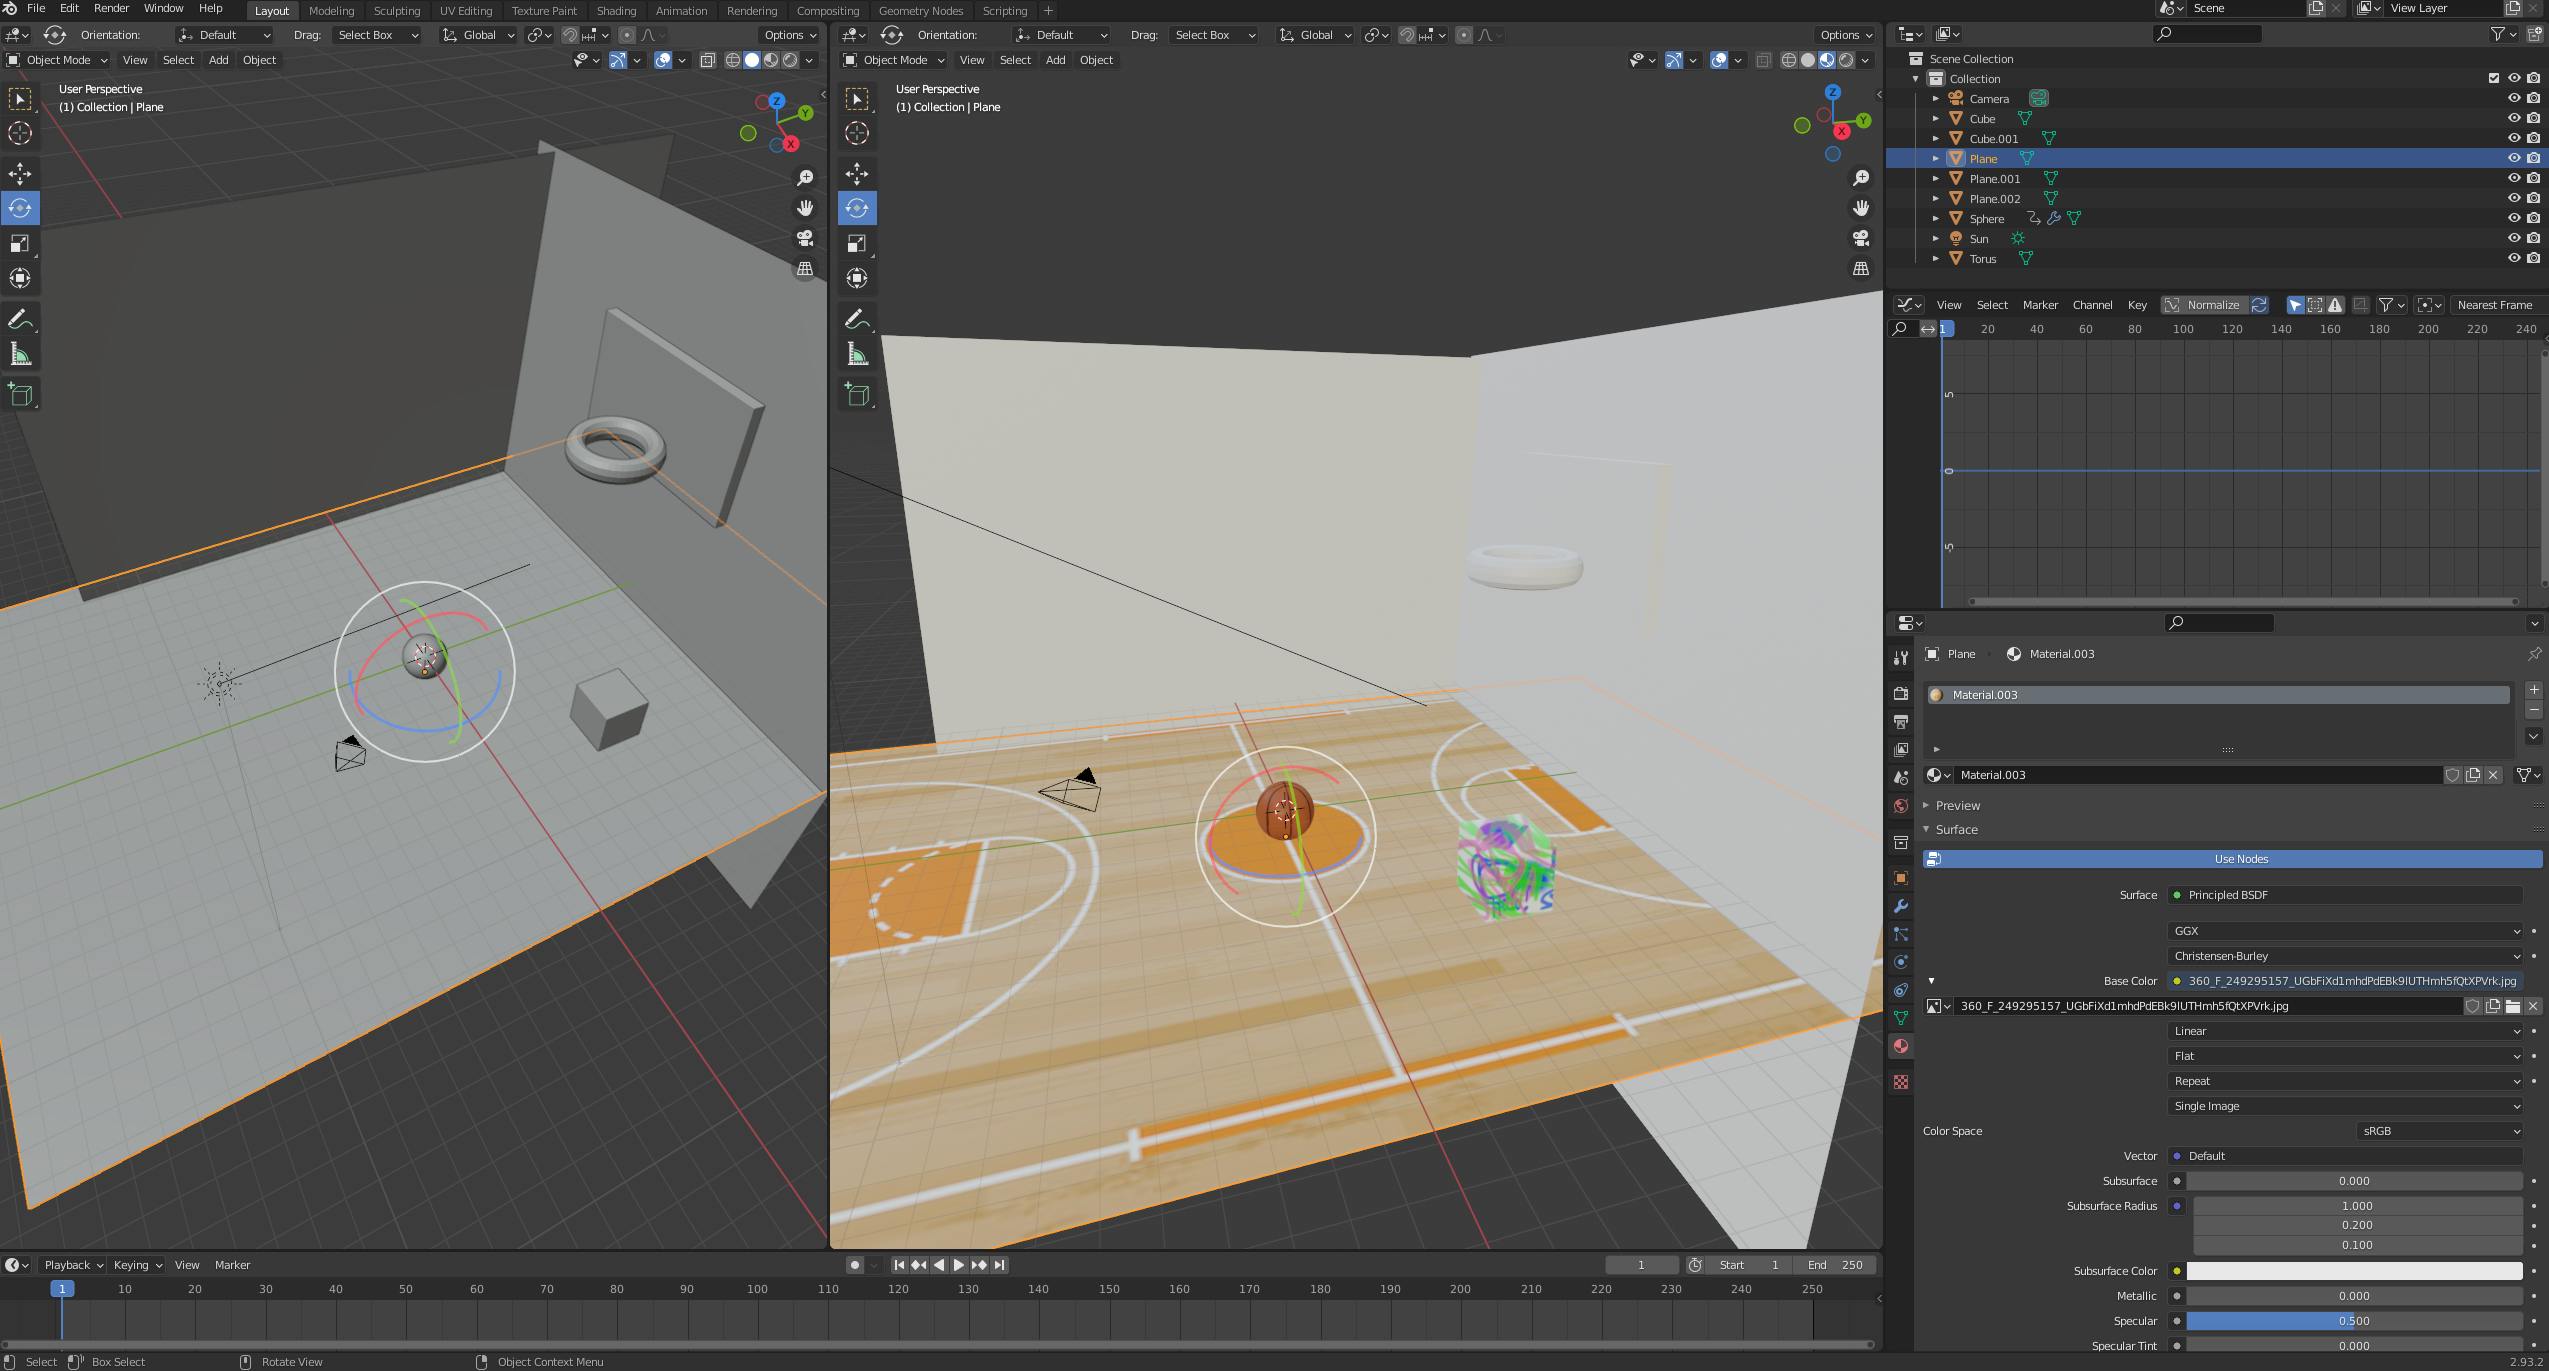 Blender workspace, with two views - rendered and not - of a basketball in a basketball court